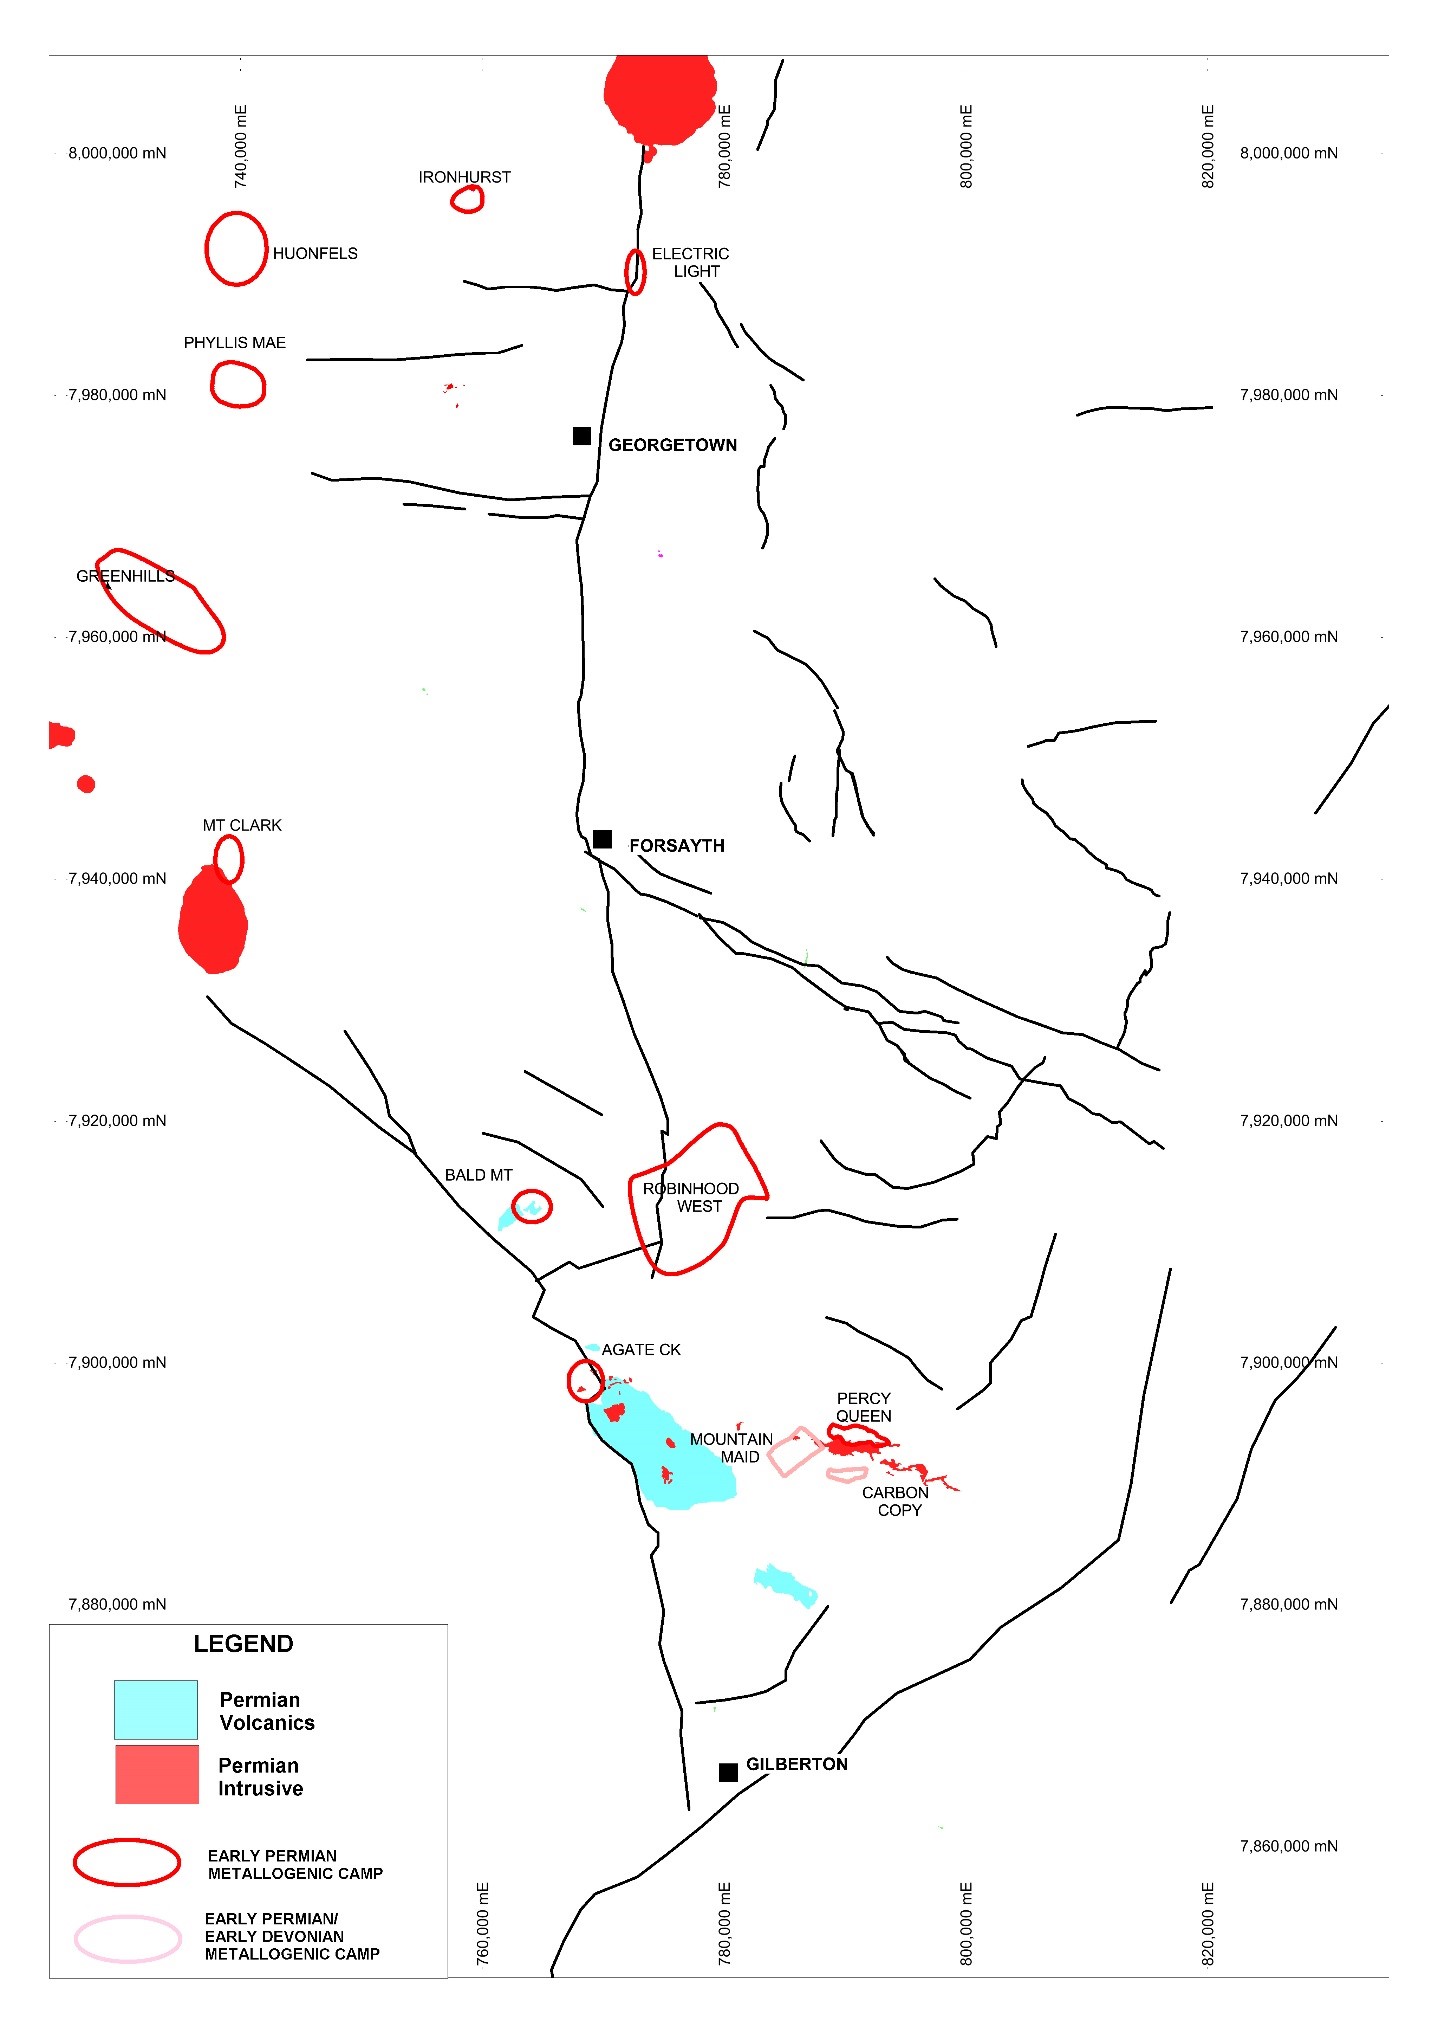 Figure 28: Permian geology with Permian metallogenic camps